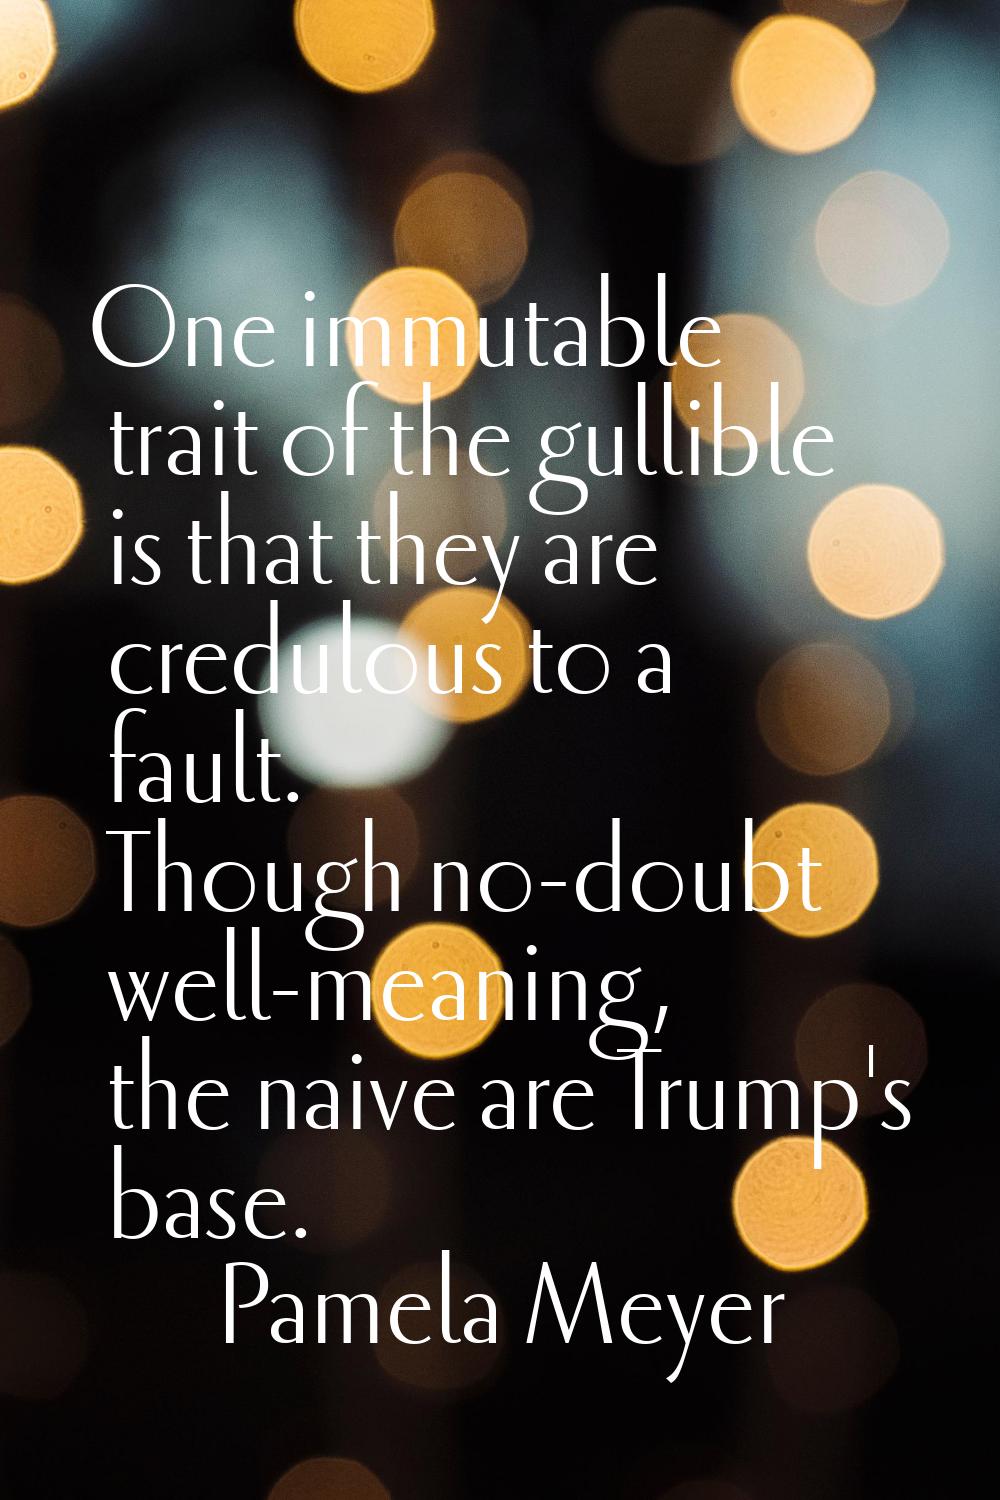 One immutable trait of the gullible is that they are credulous to a fault. Though no-doubt well-mea